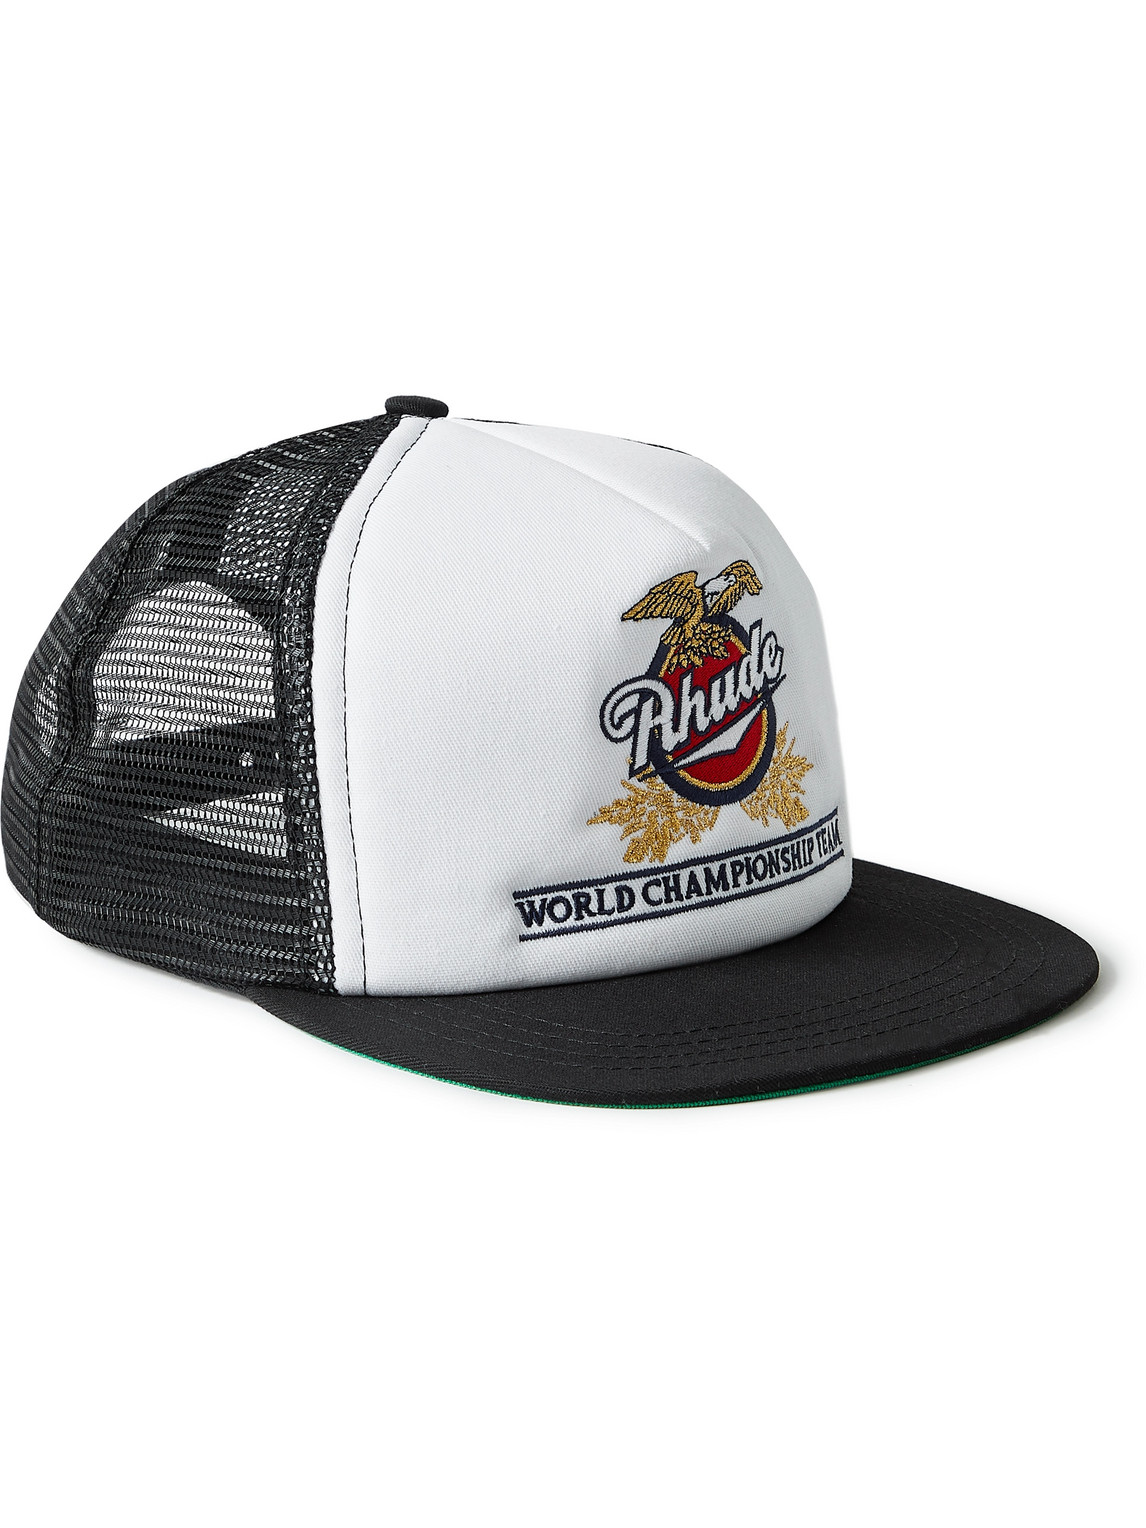 World Championship Team Logo-Embroidered Twill and Mesh Trucker Cap